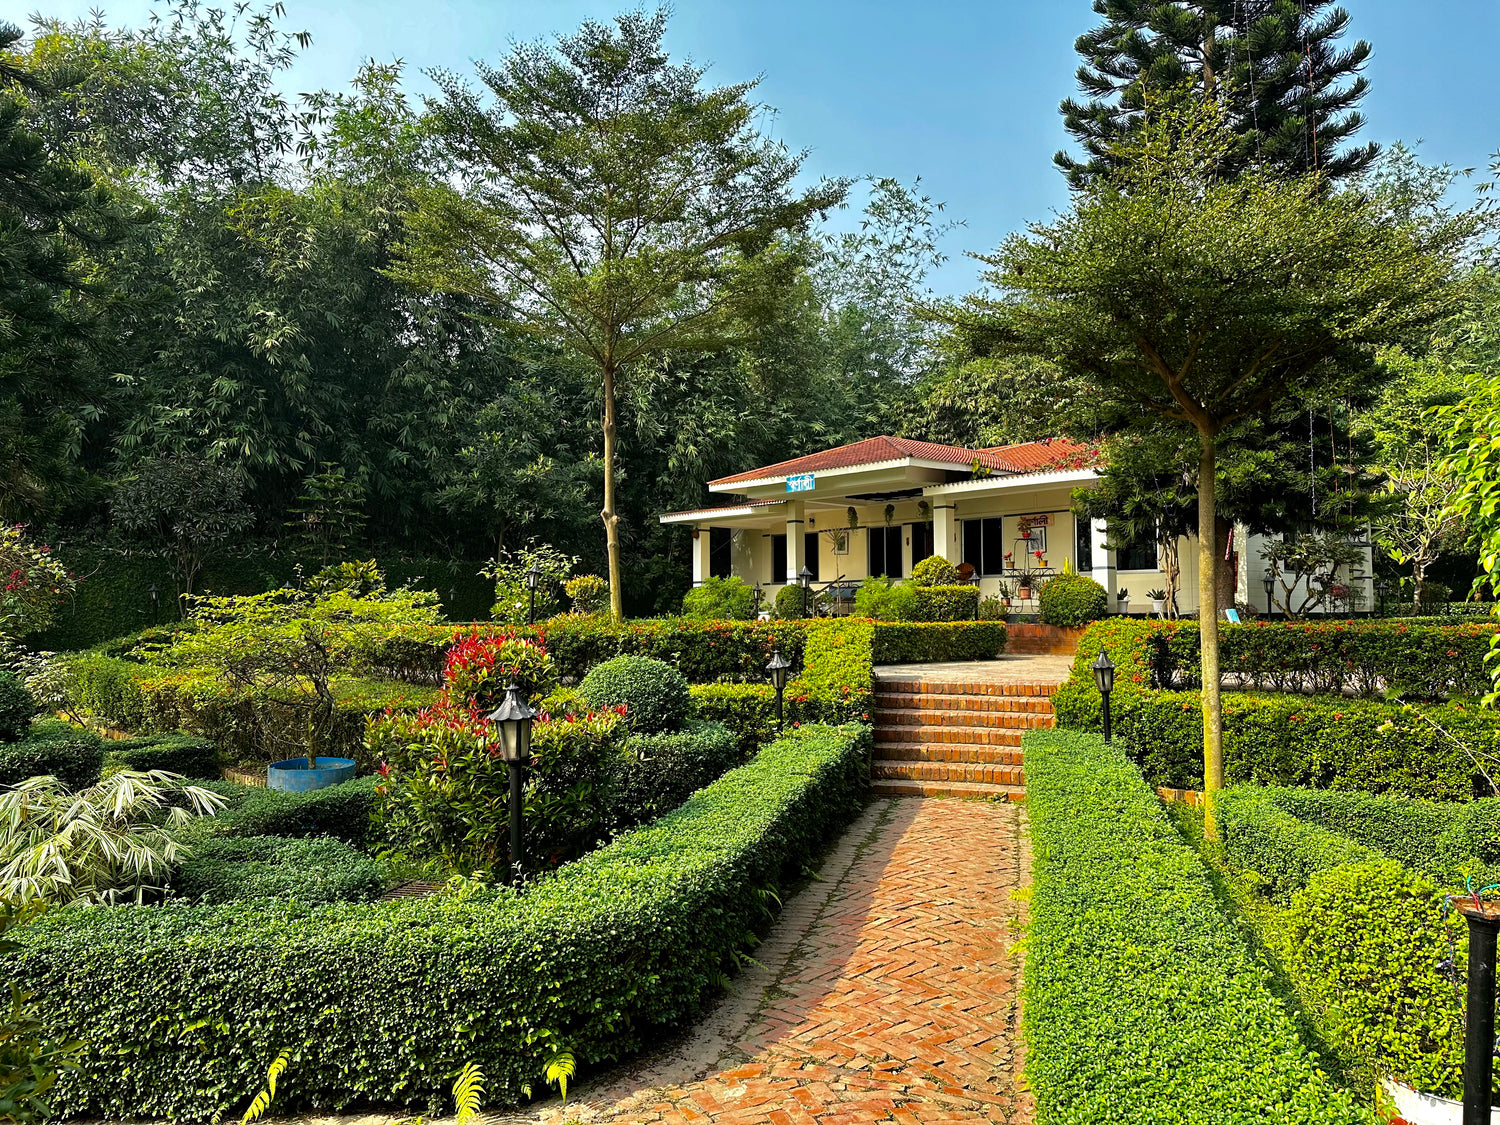 Beautifully landscaped gardens at Barnochata, a premier resort and Dhaka hotel located in Savar, featuring manicured hedges and a welcoming brick pathway.